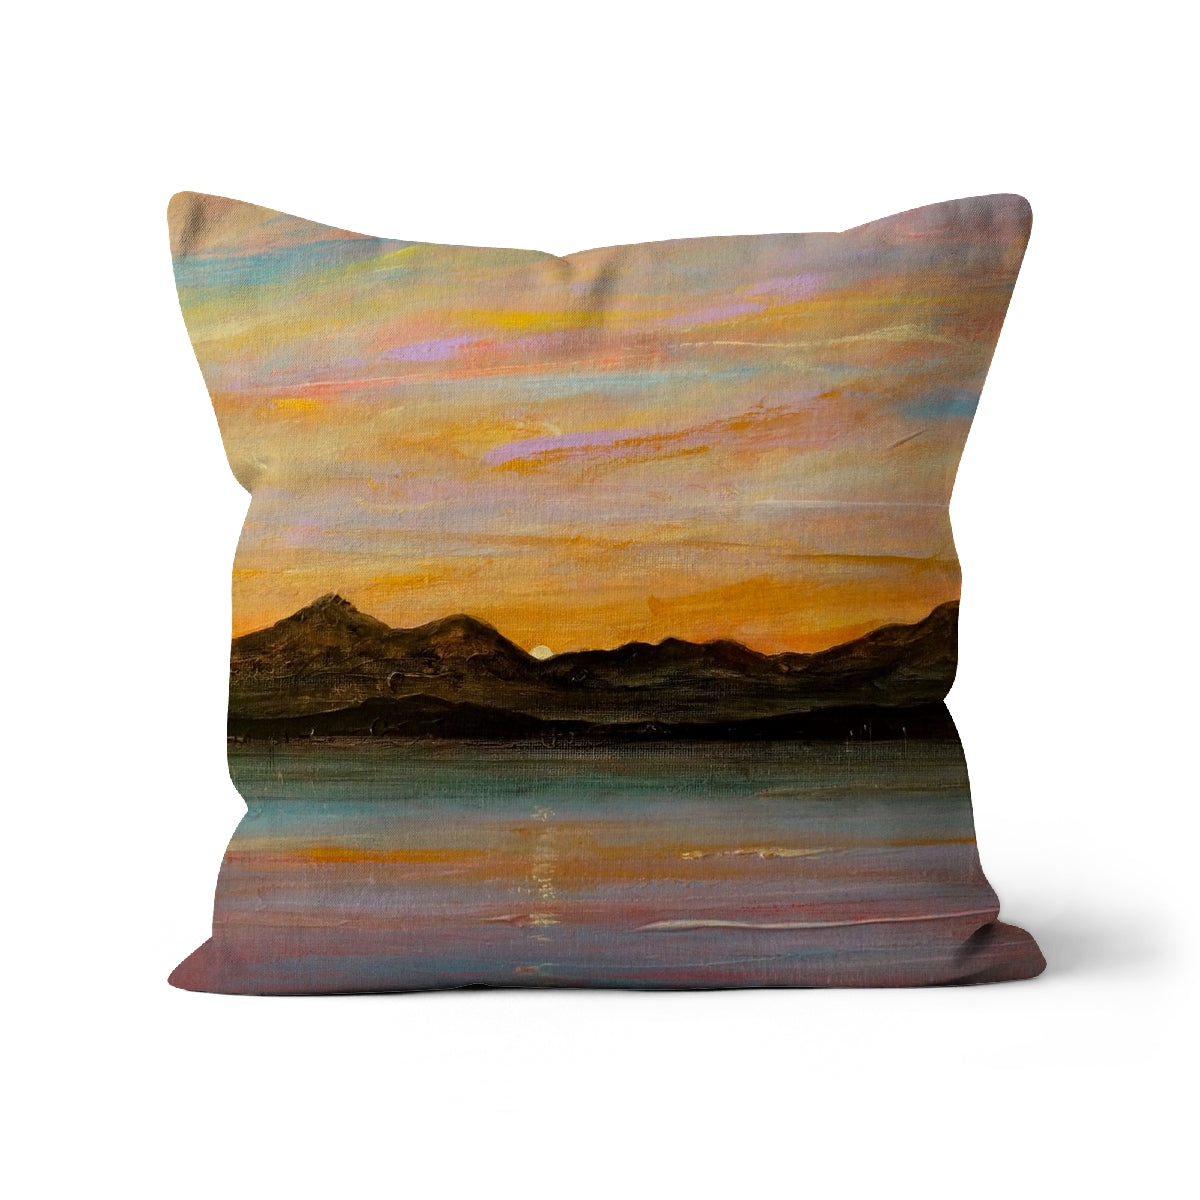 The Sleeping Warrior Arran Art Gifts Cushion-Cushions-Arran Art Gallery-Canvas-24"x24"-Paintings, Prints, Homeware, Art Gifts From Scotland By Scottish Artist Kevin Hunter